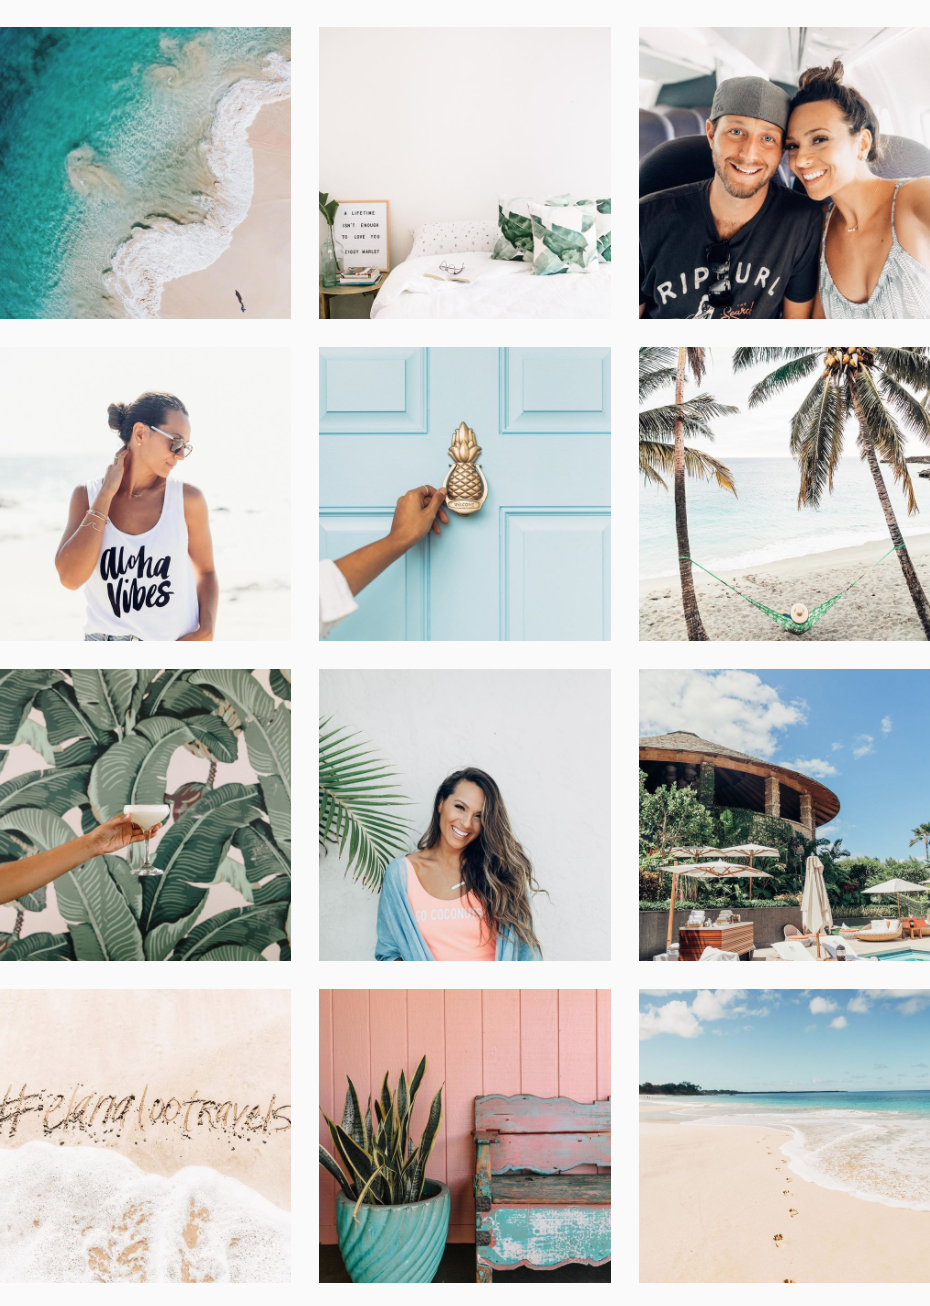 Instagram Feed of @elanaloo | My Journey with Social Media | Travel Blogger Shares Her Journey with Social Media | Shifting your mindset about Social Media | How to have a positive experience on social media | Social Media for Business | How To Leverage Your Social Media via @elanaloo + elanaloo.com